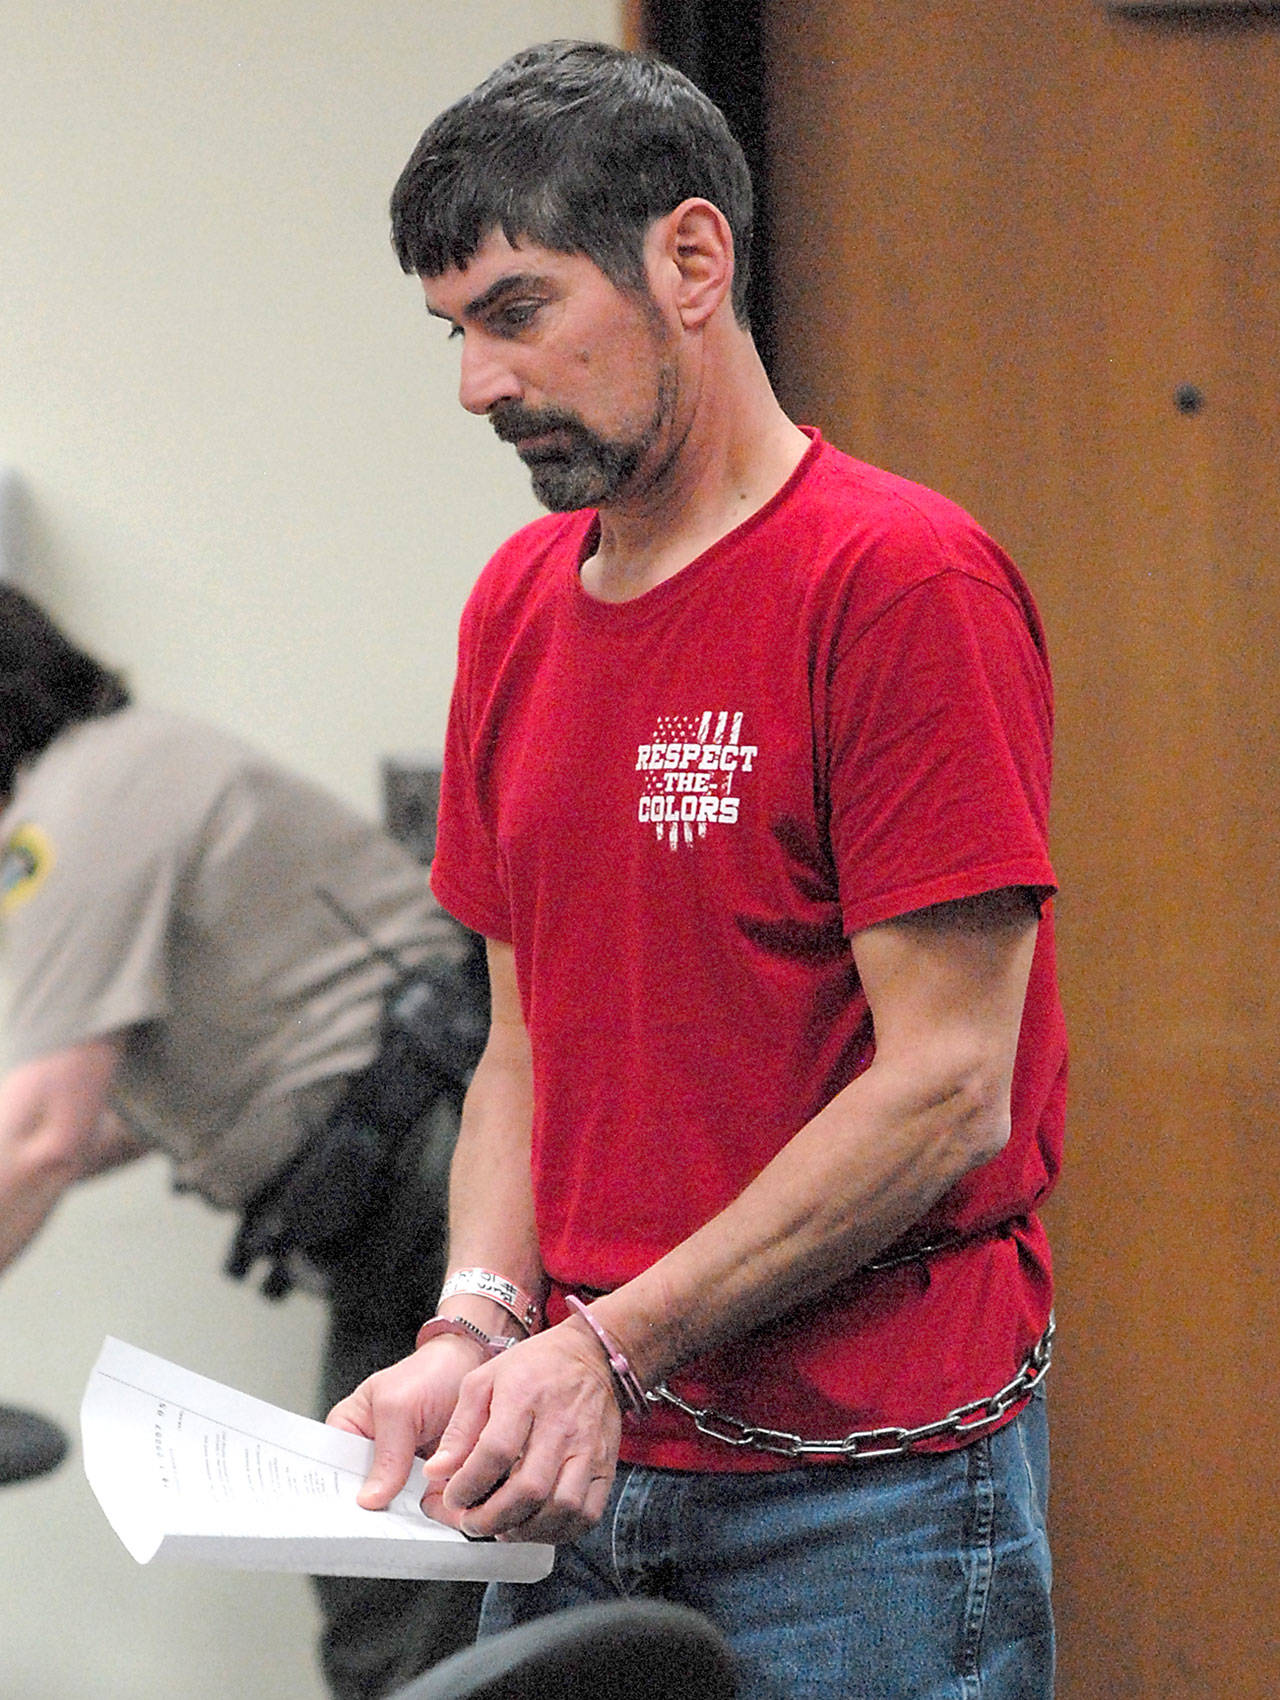 Robert Eugene Burns makes his first appearance in Clallam County Superior Court in Port Angeles on Tuesday. (Keith Thorpe/Peninsula Daily News)